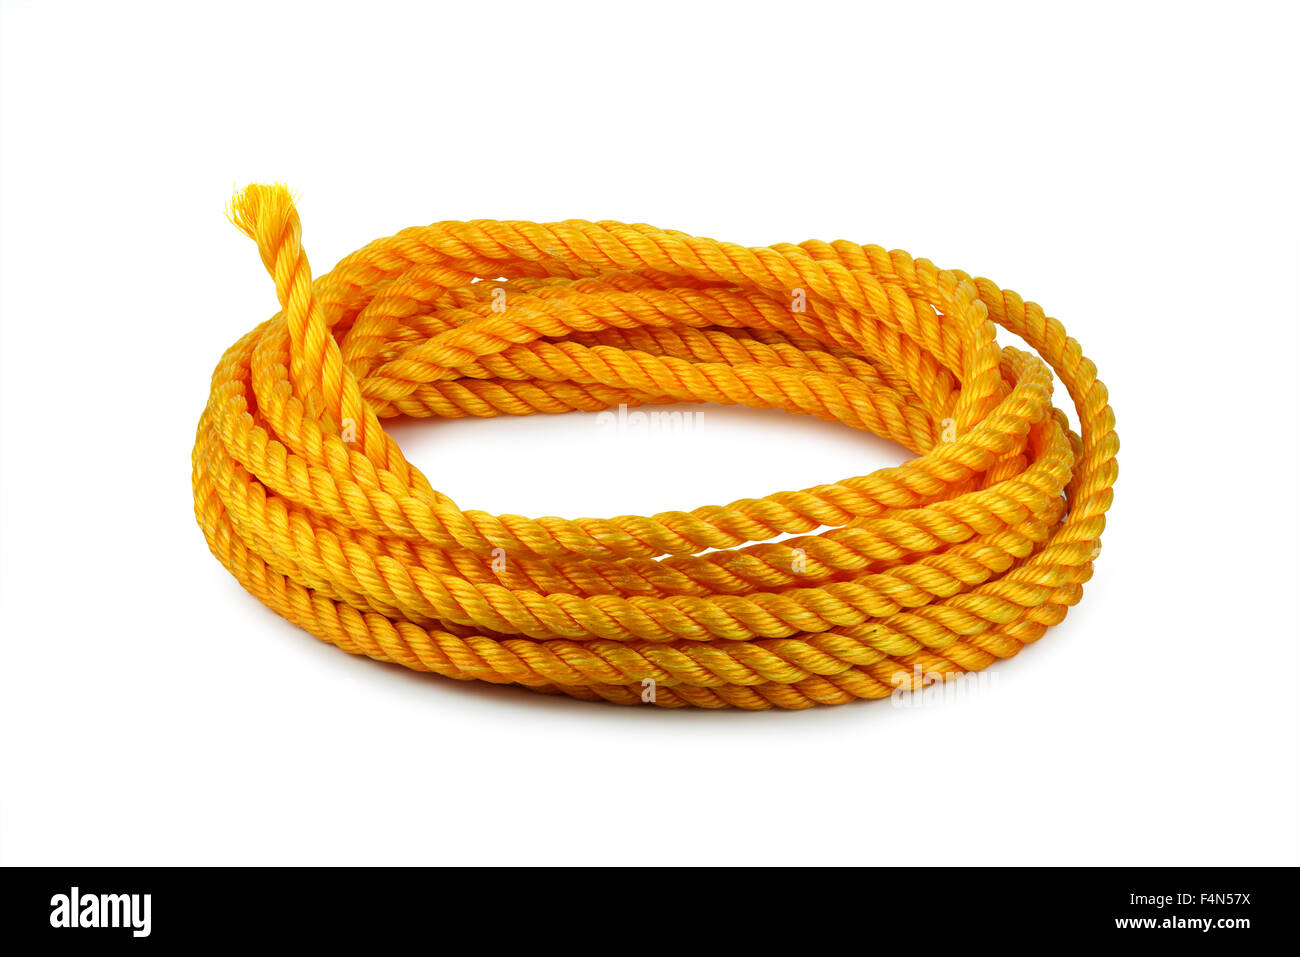 1,180 Twisted Synthetic Rope Images, Stock Photos, 3D objects